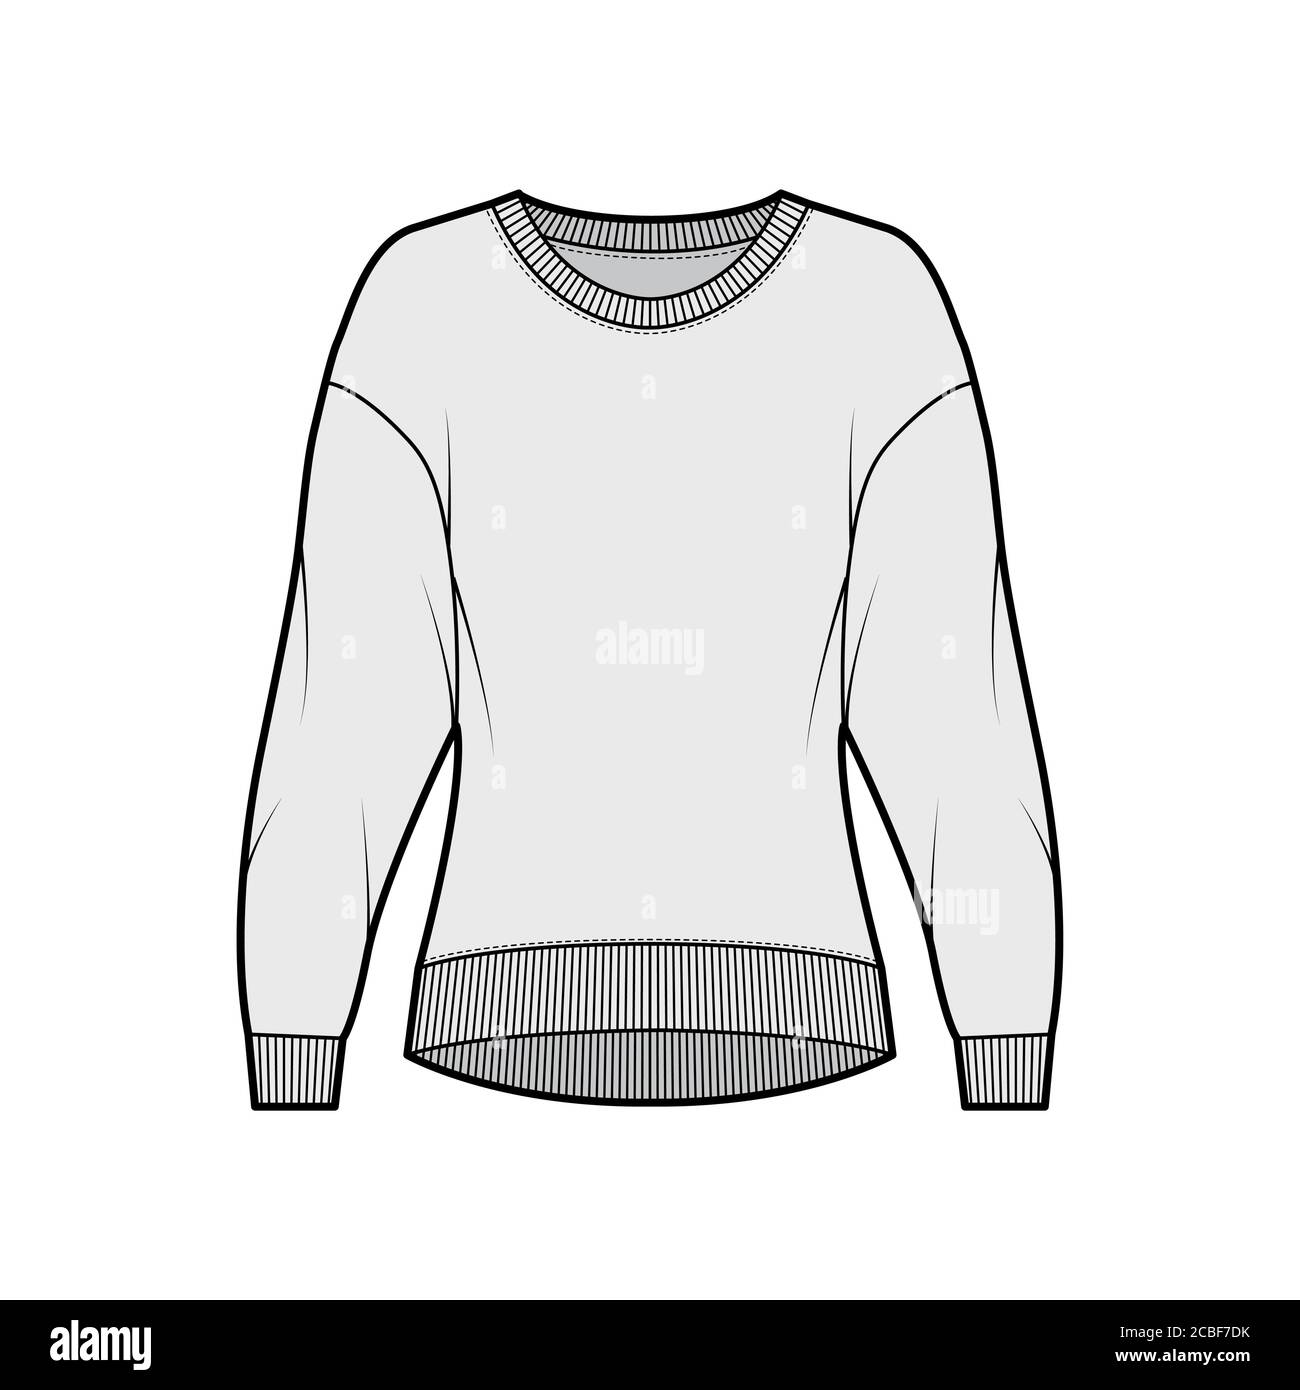 Cotton-terry sweatshirt technical fashion illustration with relaxed fit, crew neckline, long sleeves. Flat outwear jumper apparel template front, grey color. Women, men, unisex top CAD mockup Stock Vector